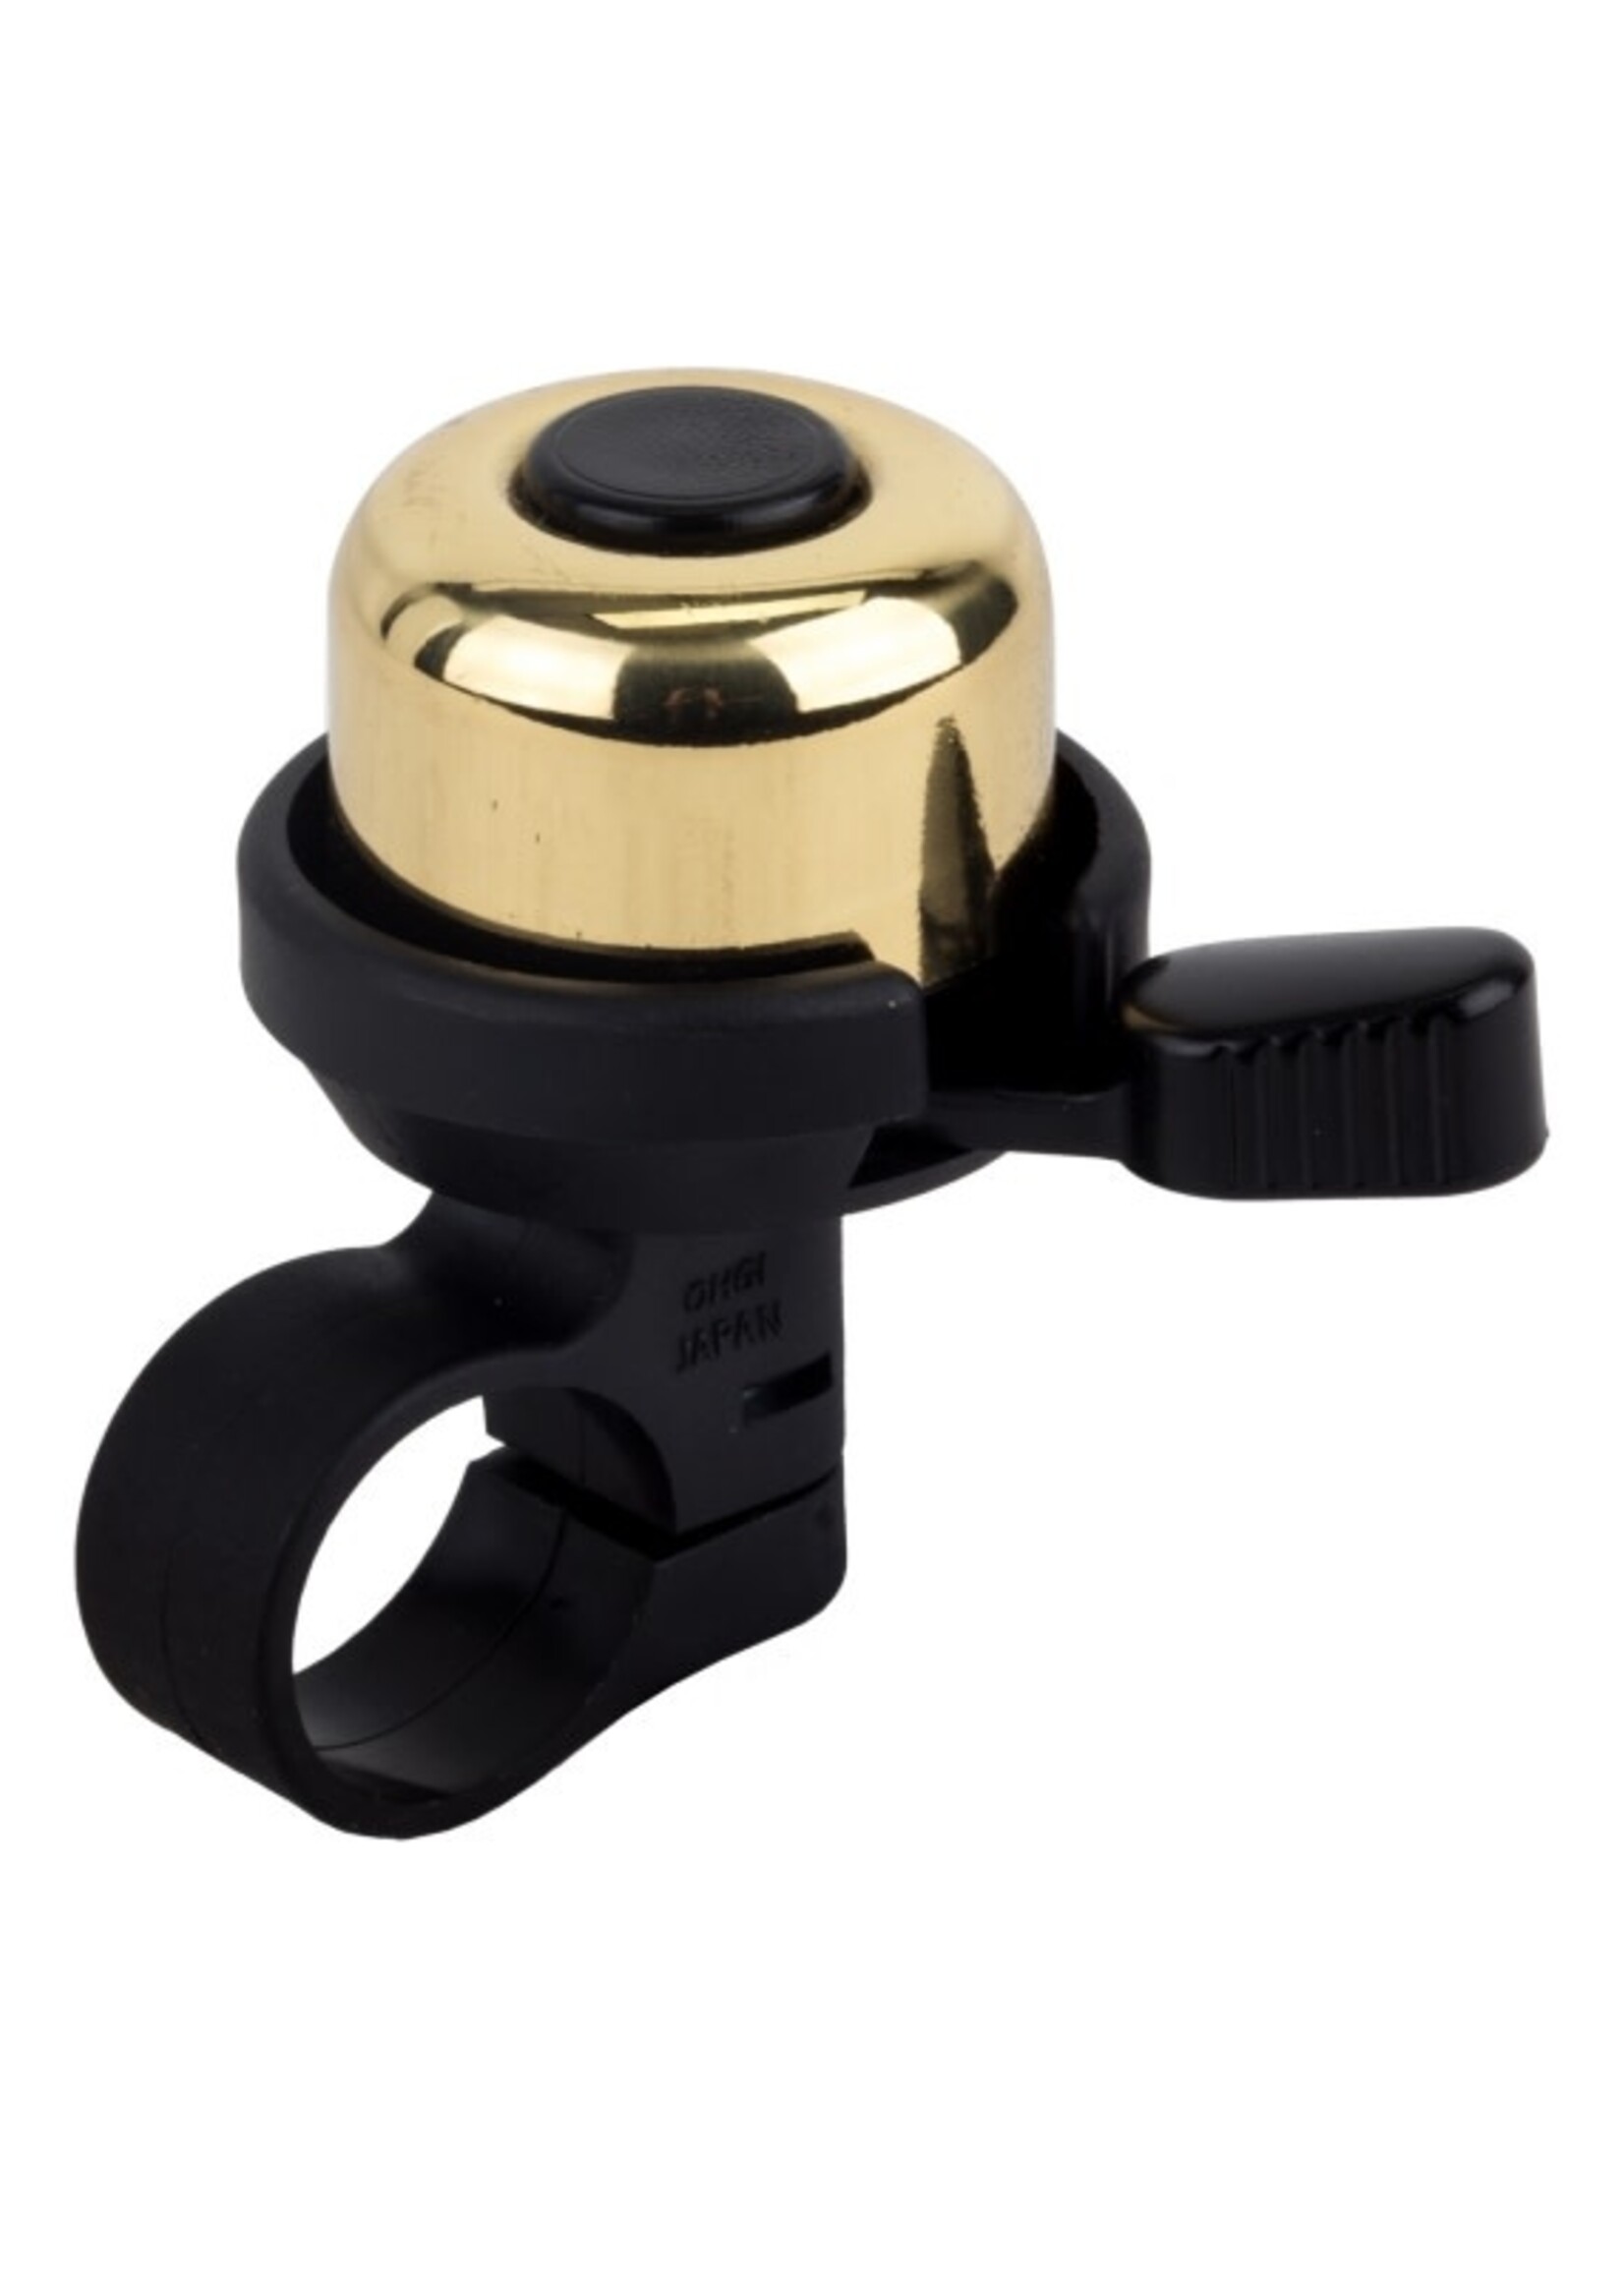 MIRRYCLE BELL MIRRYCLE INCREDIBELL-DUET ALL BRASS